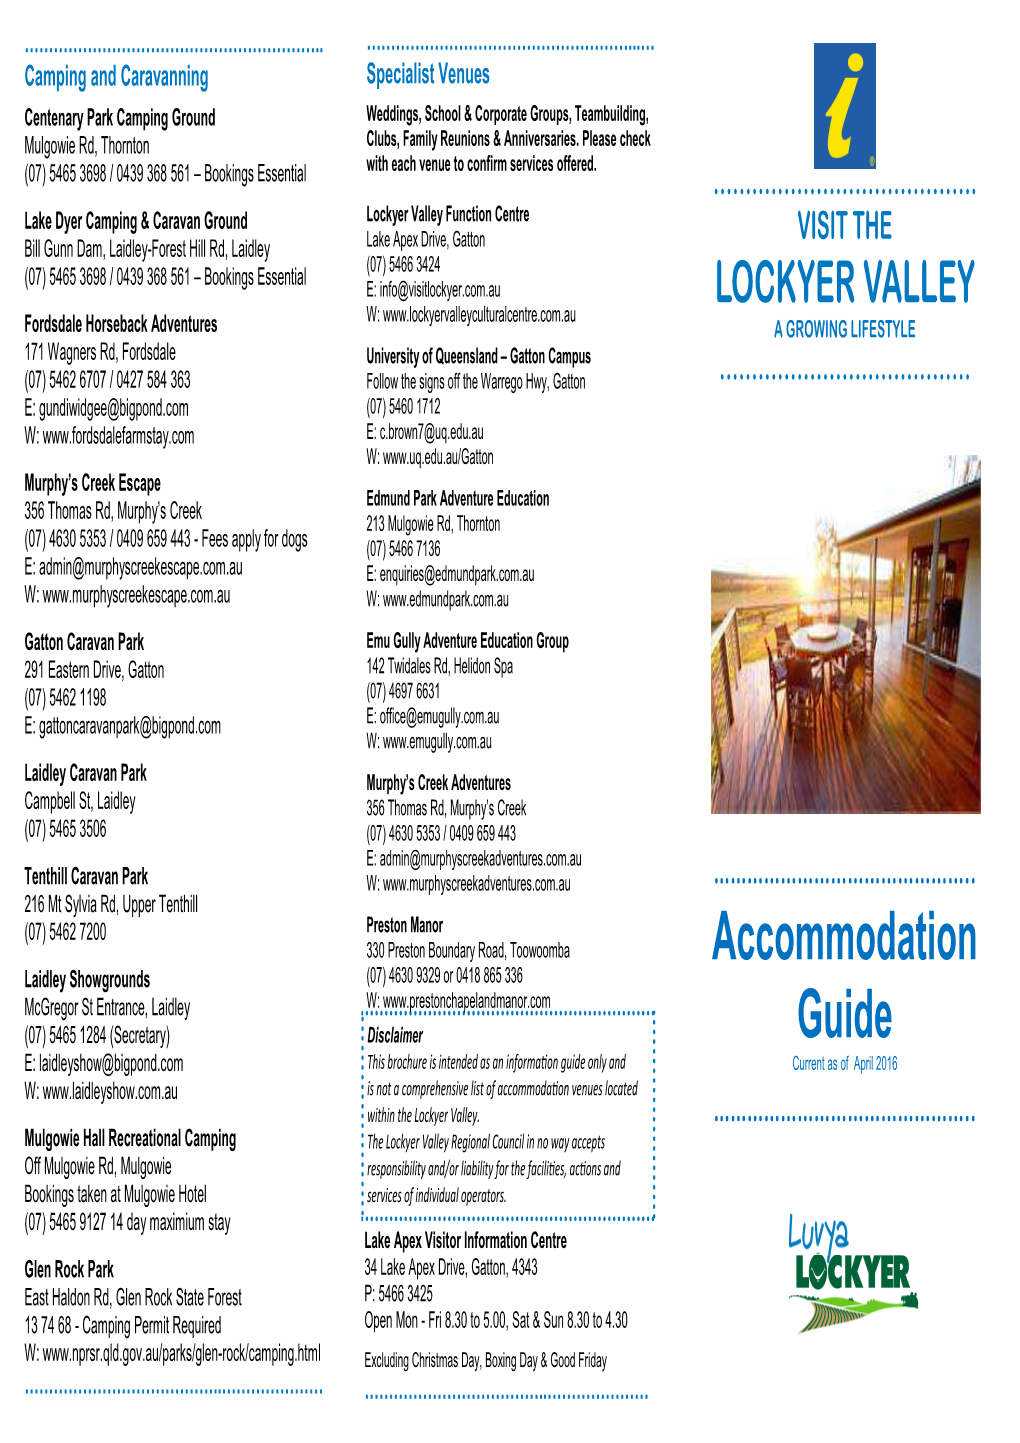 Visitor Information Centre Lockyer Valley Accommodation Guide